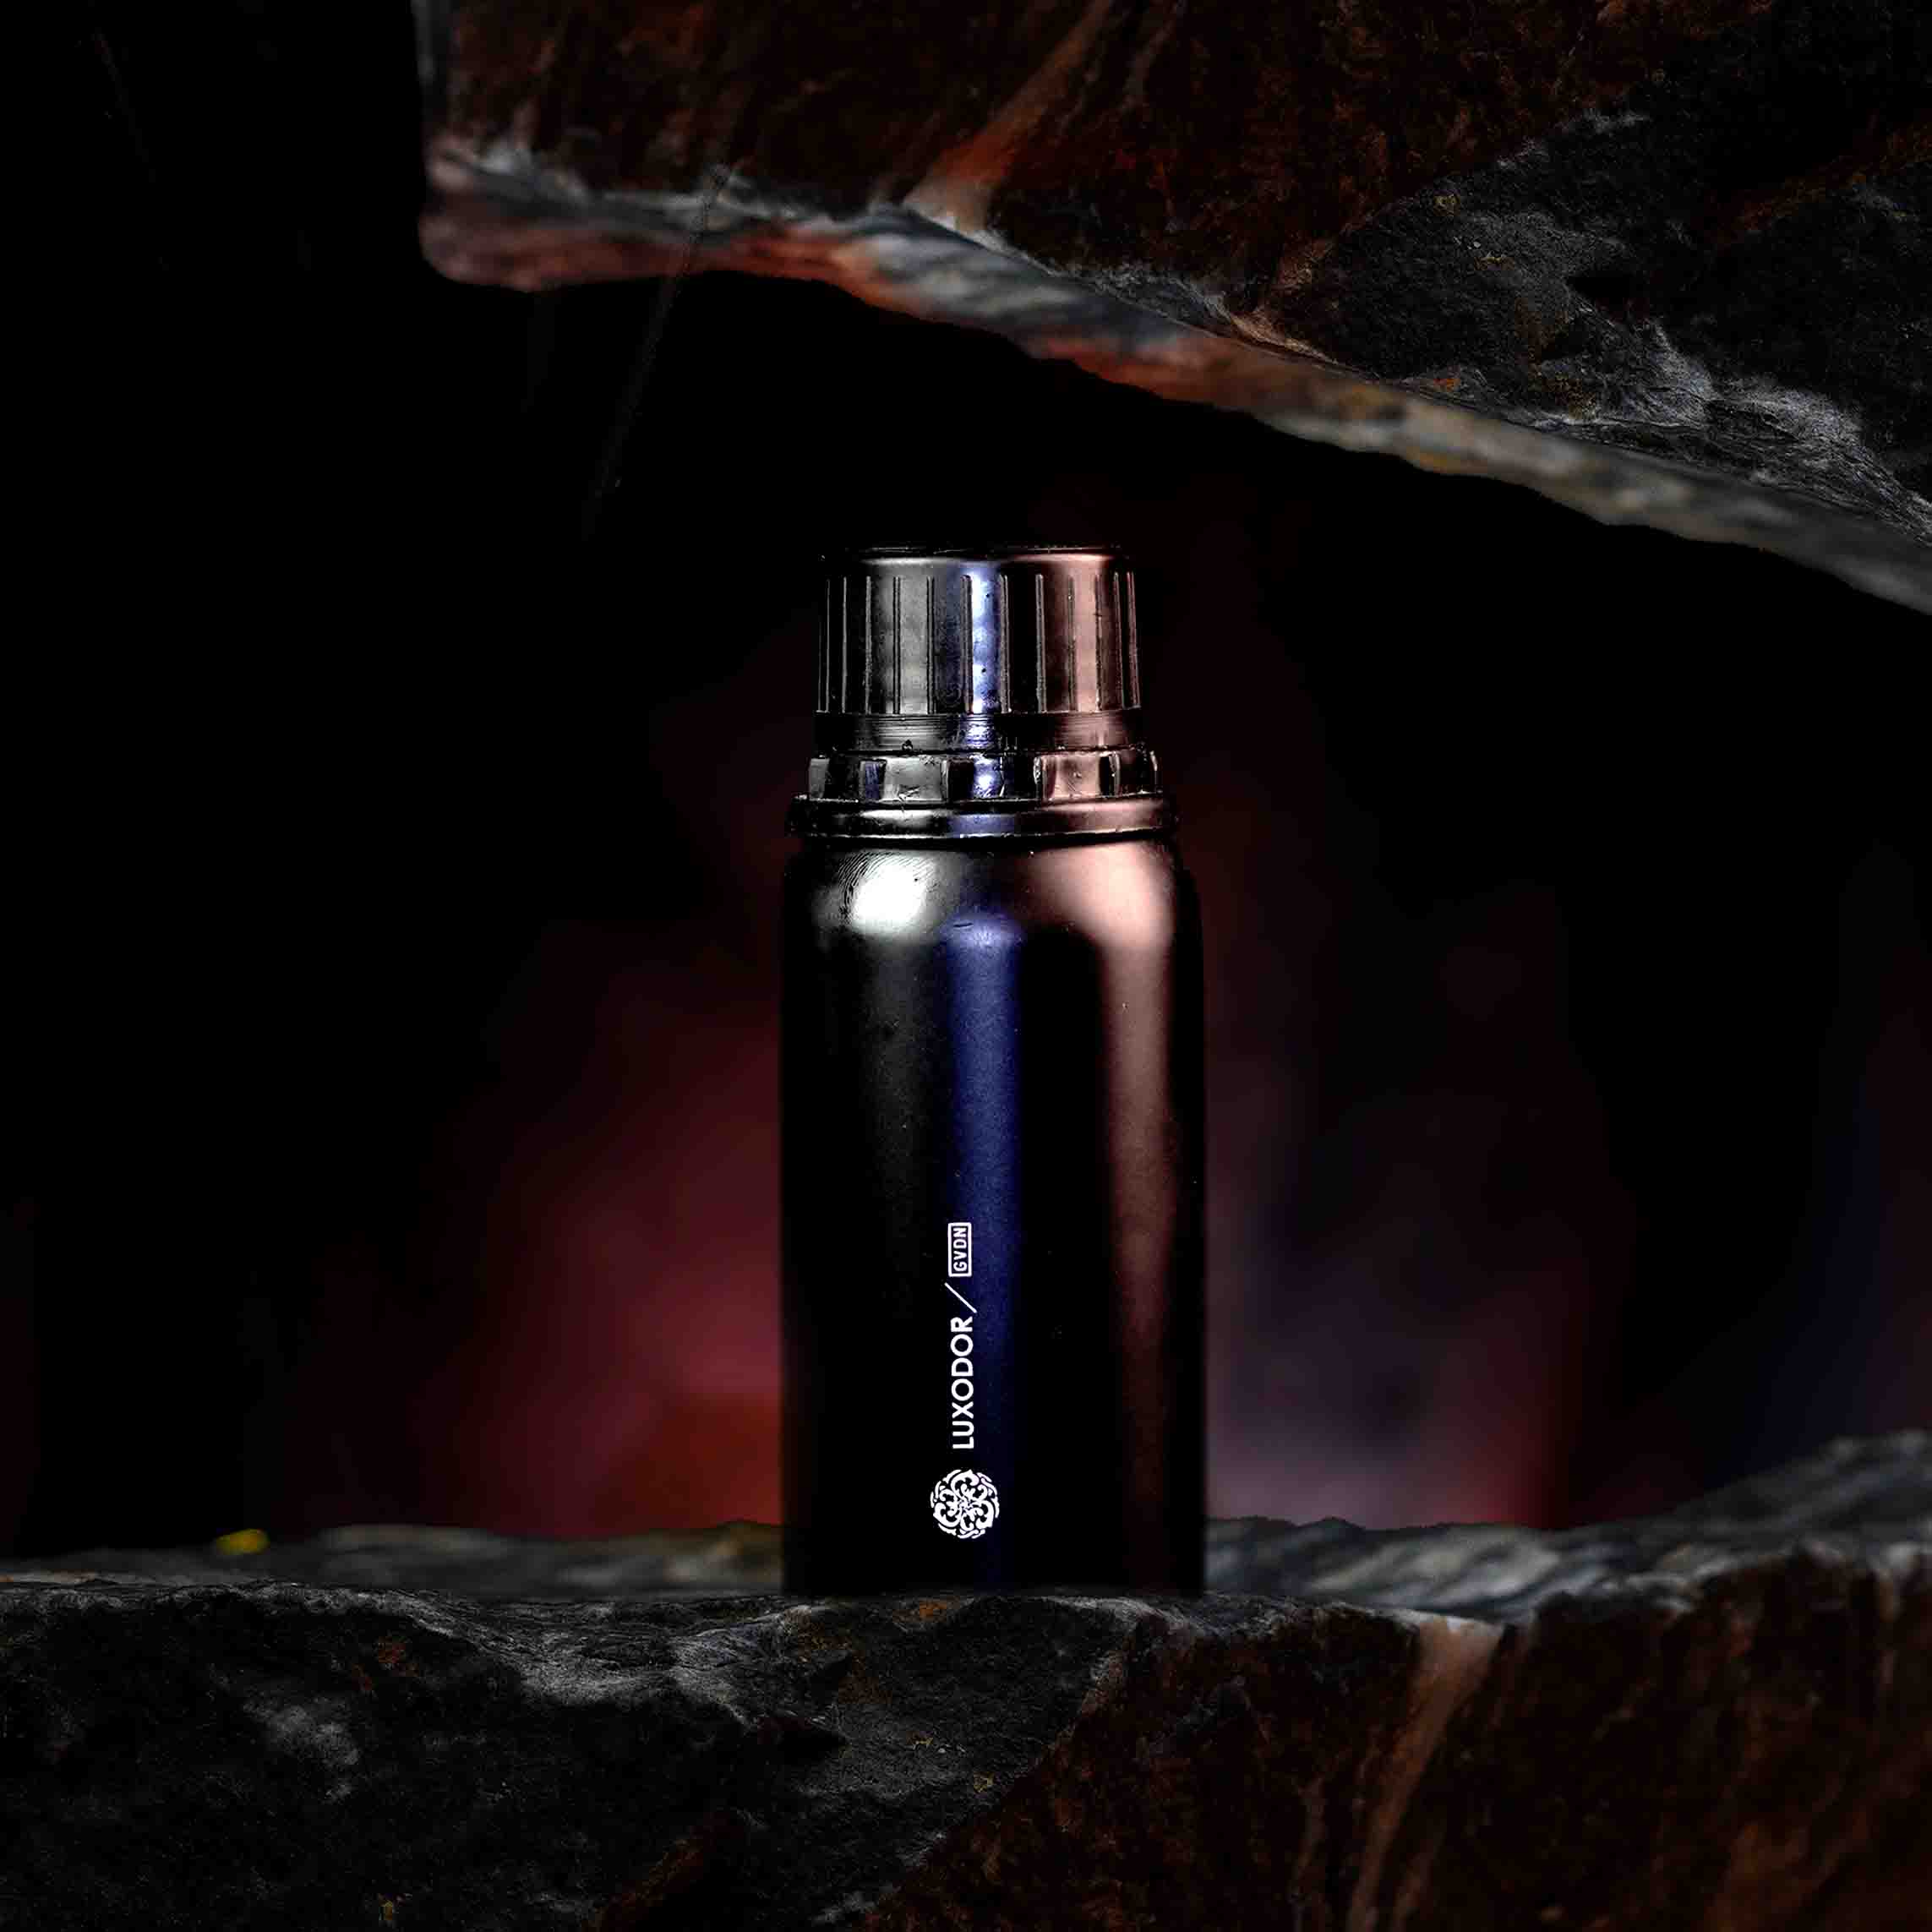 Our Creation of Issey Miyake's L'Eau D'Issey Pure Nectar De Parfum